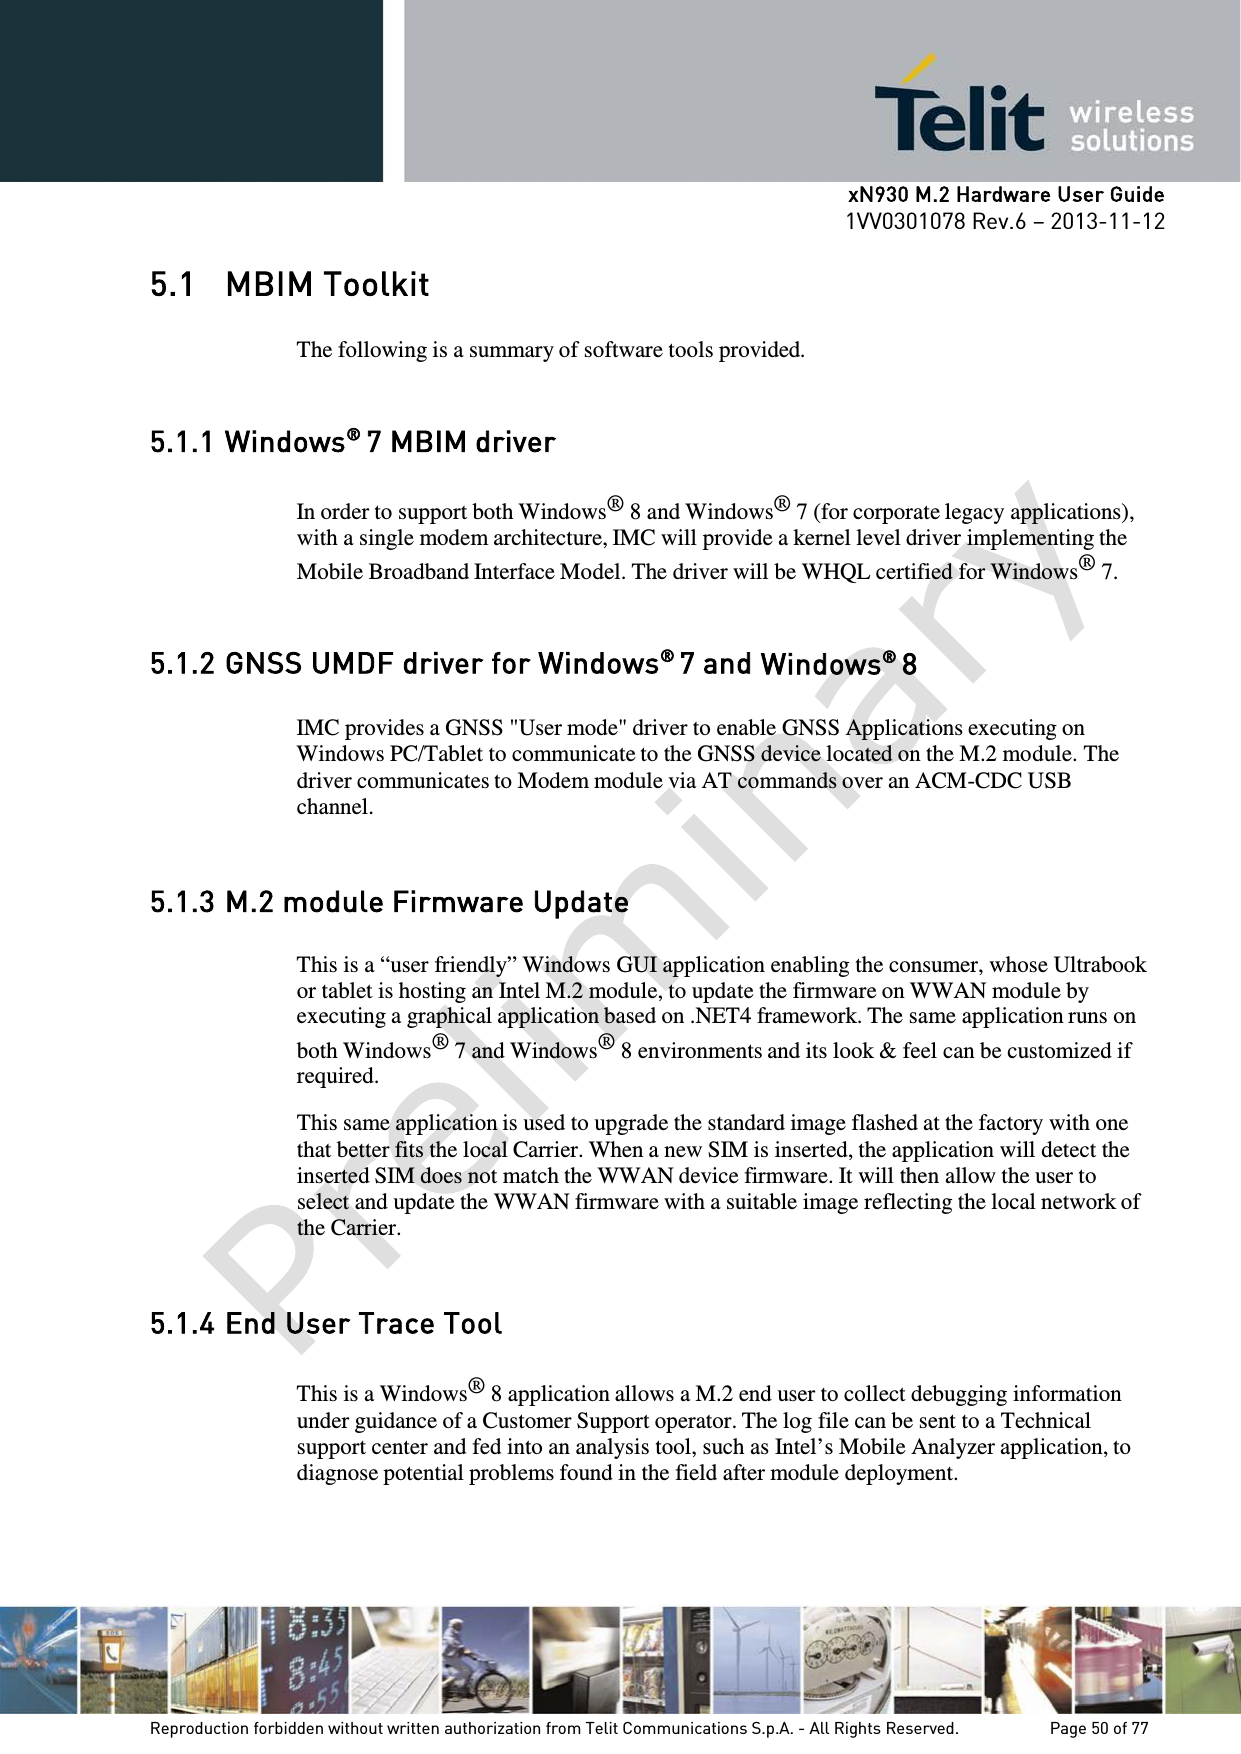      xN930 M.2 Hardware User Guide 1VV0301078 Rev.6 – 2013-11-12    5.1 MBIM Toolkit   The following is a summary of software tools provided.   5.1.1 Windows® 7 MBIM driver  In order to support both Windows® 8 and Windows® 7 (for corporate legacy applications), with a single modem architecture, IMC will provide a kernel level driver implementing the Mobile Broadband Interface Model. The driver will be WHQL certified for Windows® 7.   5.1.2 GNSS UMDF driver for Windows® 7 and Windows® 8  IMC provides a GNSS &quot;User mode&quot; driver to enable GNSS Applications executing on Windows PC/Tablet to communicate to the GNSS device located on the M.2 module. The driver communicates to Modem module via AT commands over an ACM-CDC USB channel.   5.1.3 M.2 module Firmware Update  This is a “user friendly” Windows GUI application enabling the consumer, whose Ultrabook or tablet is hosting an Intel M.2 module, to update the firmware on WWAN module by executing a graphical application based on .NET4 framework. The same application runs on both Windows® 7 and Windows® 8 environments and its look &amp; feel can be customized if required.  This same application is used to upgrade the standard image flashed at the factory with one that better fits the local Carrier. When a new SIM is inserted, the application will detect the inserted SIM does not match the WWAN device firmware. It will then allow the user to select and update the WWAN firmware with a suitable image reflecting the local network of the Carrier.   5.1.4 End User Trace Tool  This is a Windows® 8 application allows a M.2 end user to collect debugging information under guidance of a Customer Support operator. The log file can be sent to a Technical support center and fed into an analysis tool, such as Intel’s Mobile Analyzer application, to diagnose potential problems found in the field after module deployment.   Reproduction forbidden without written authorization from Telit Communications S.p.A. - All Rights Reserved.    Page 50 of 77 